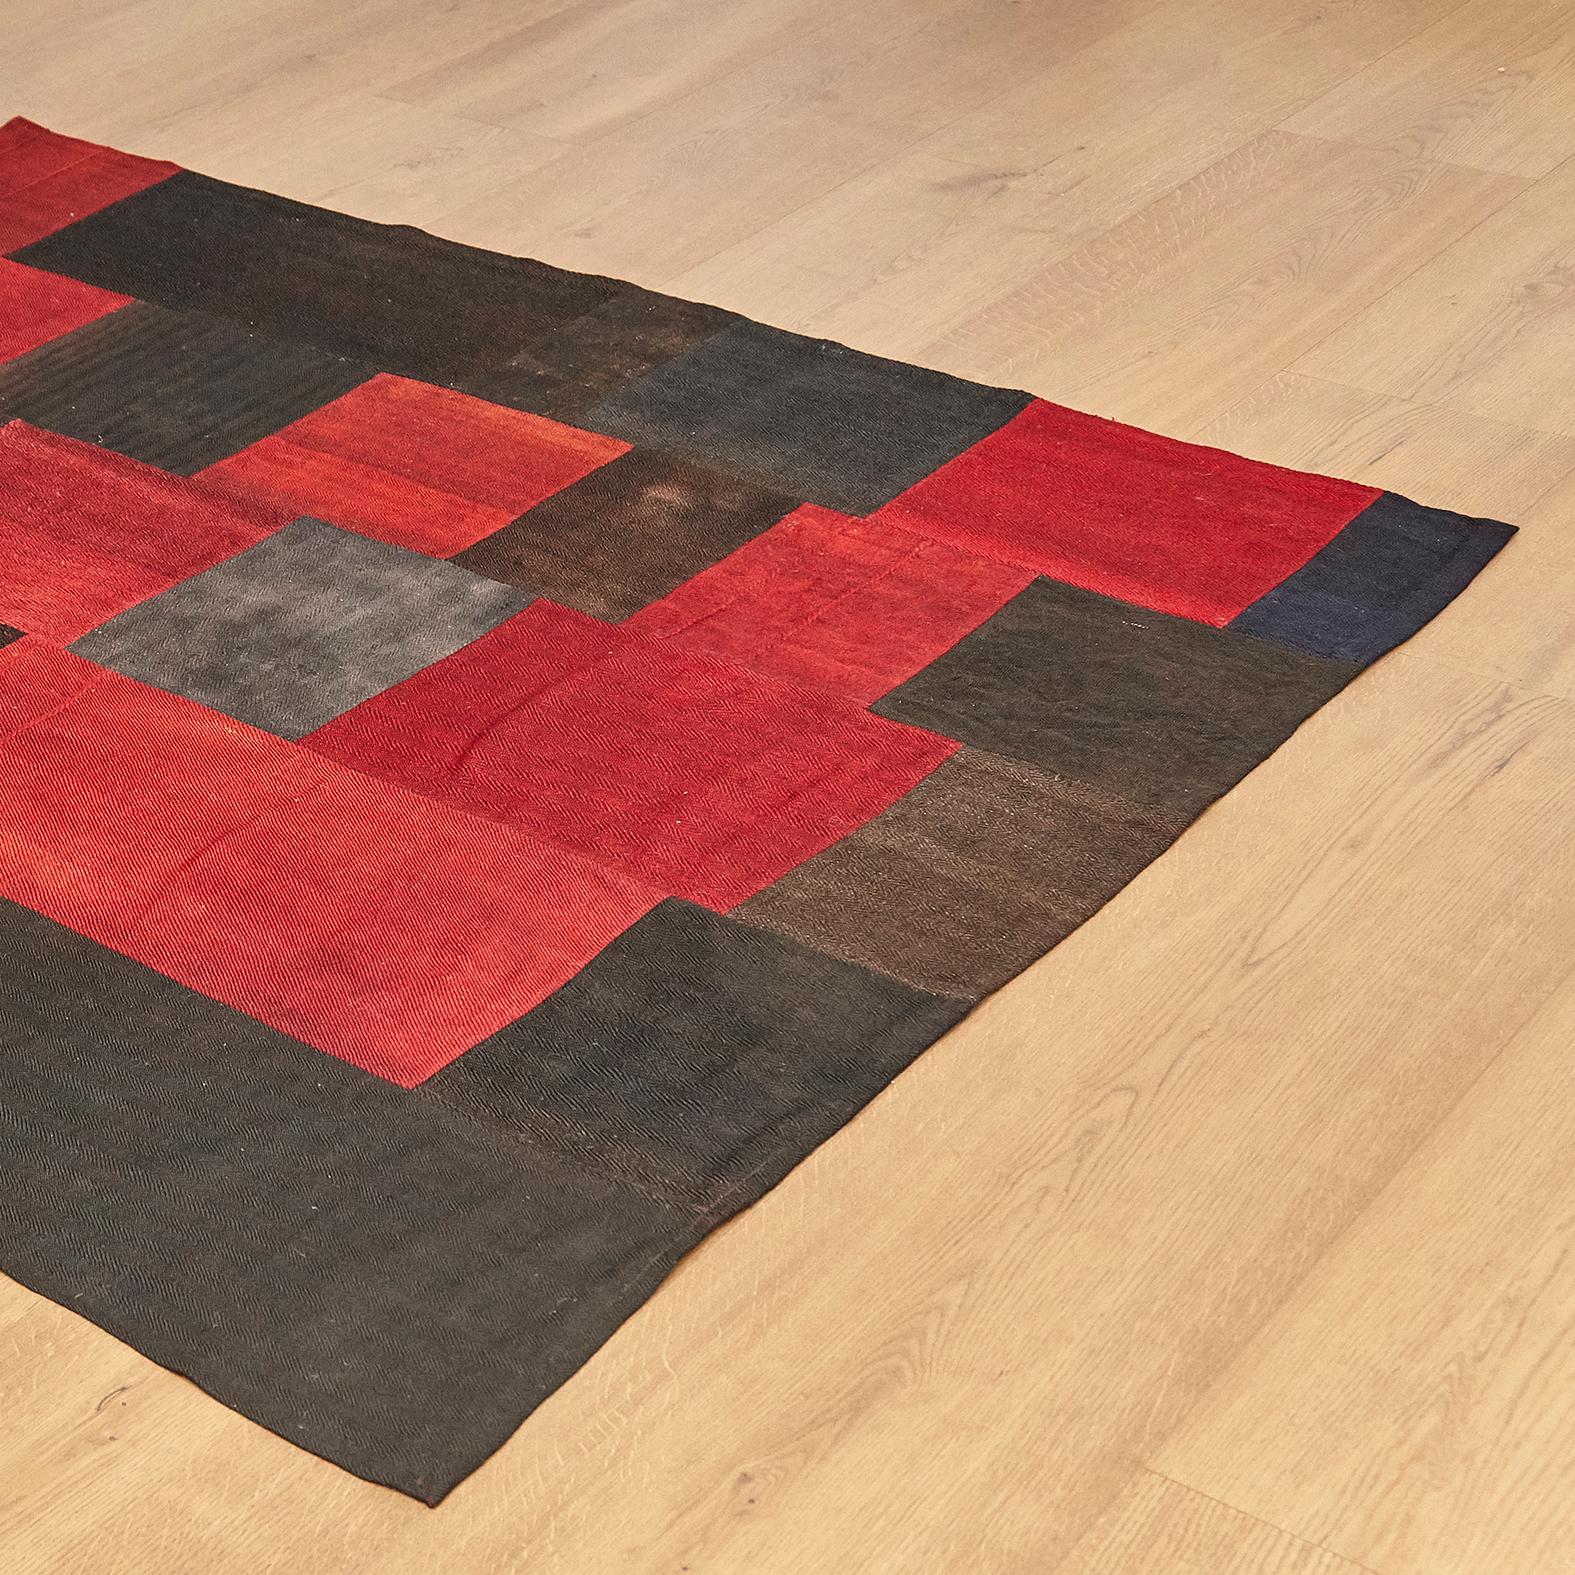 Rug antique Dizmeck Kilim from Turkey

Composition with vintage wool fabrics from east turkey

Measures: 166 x 194.
   